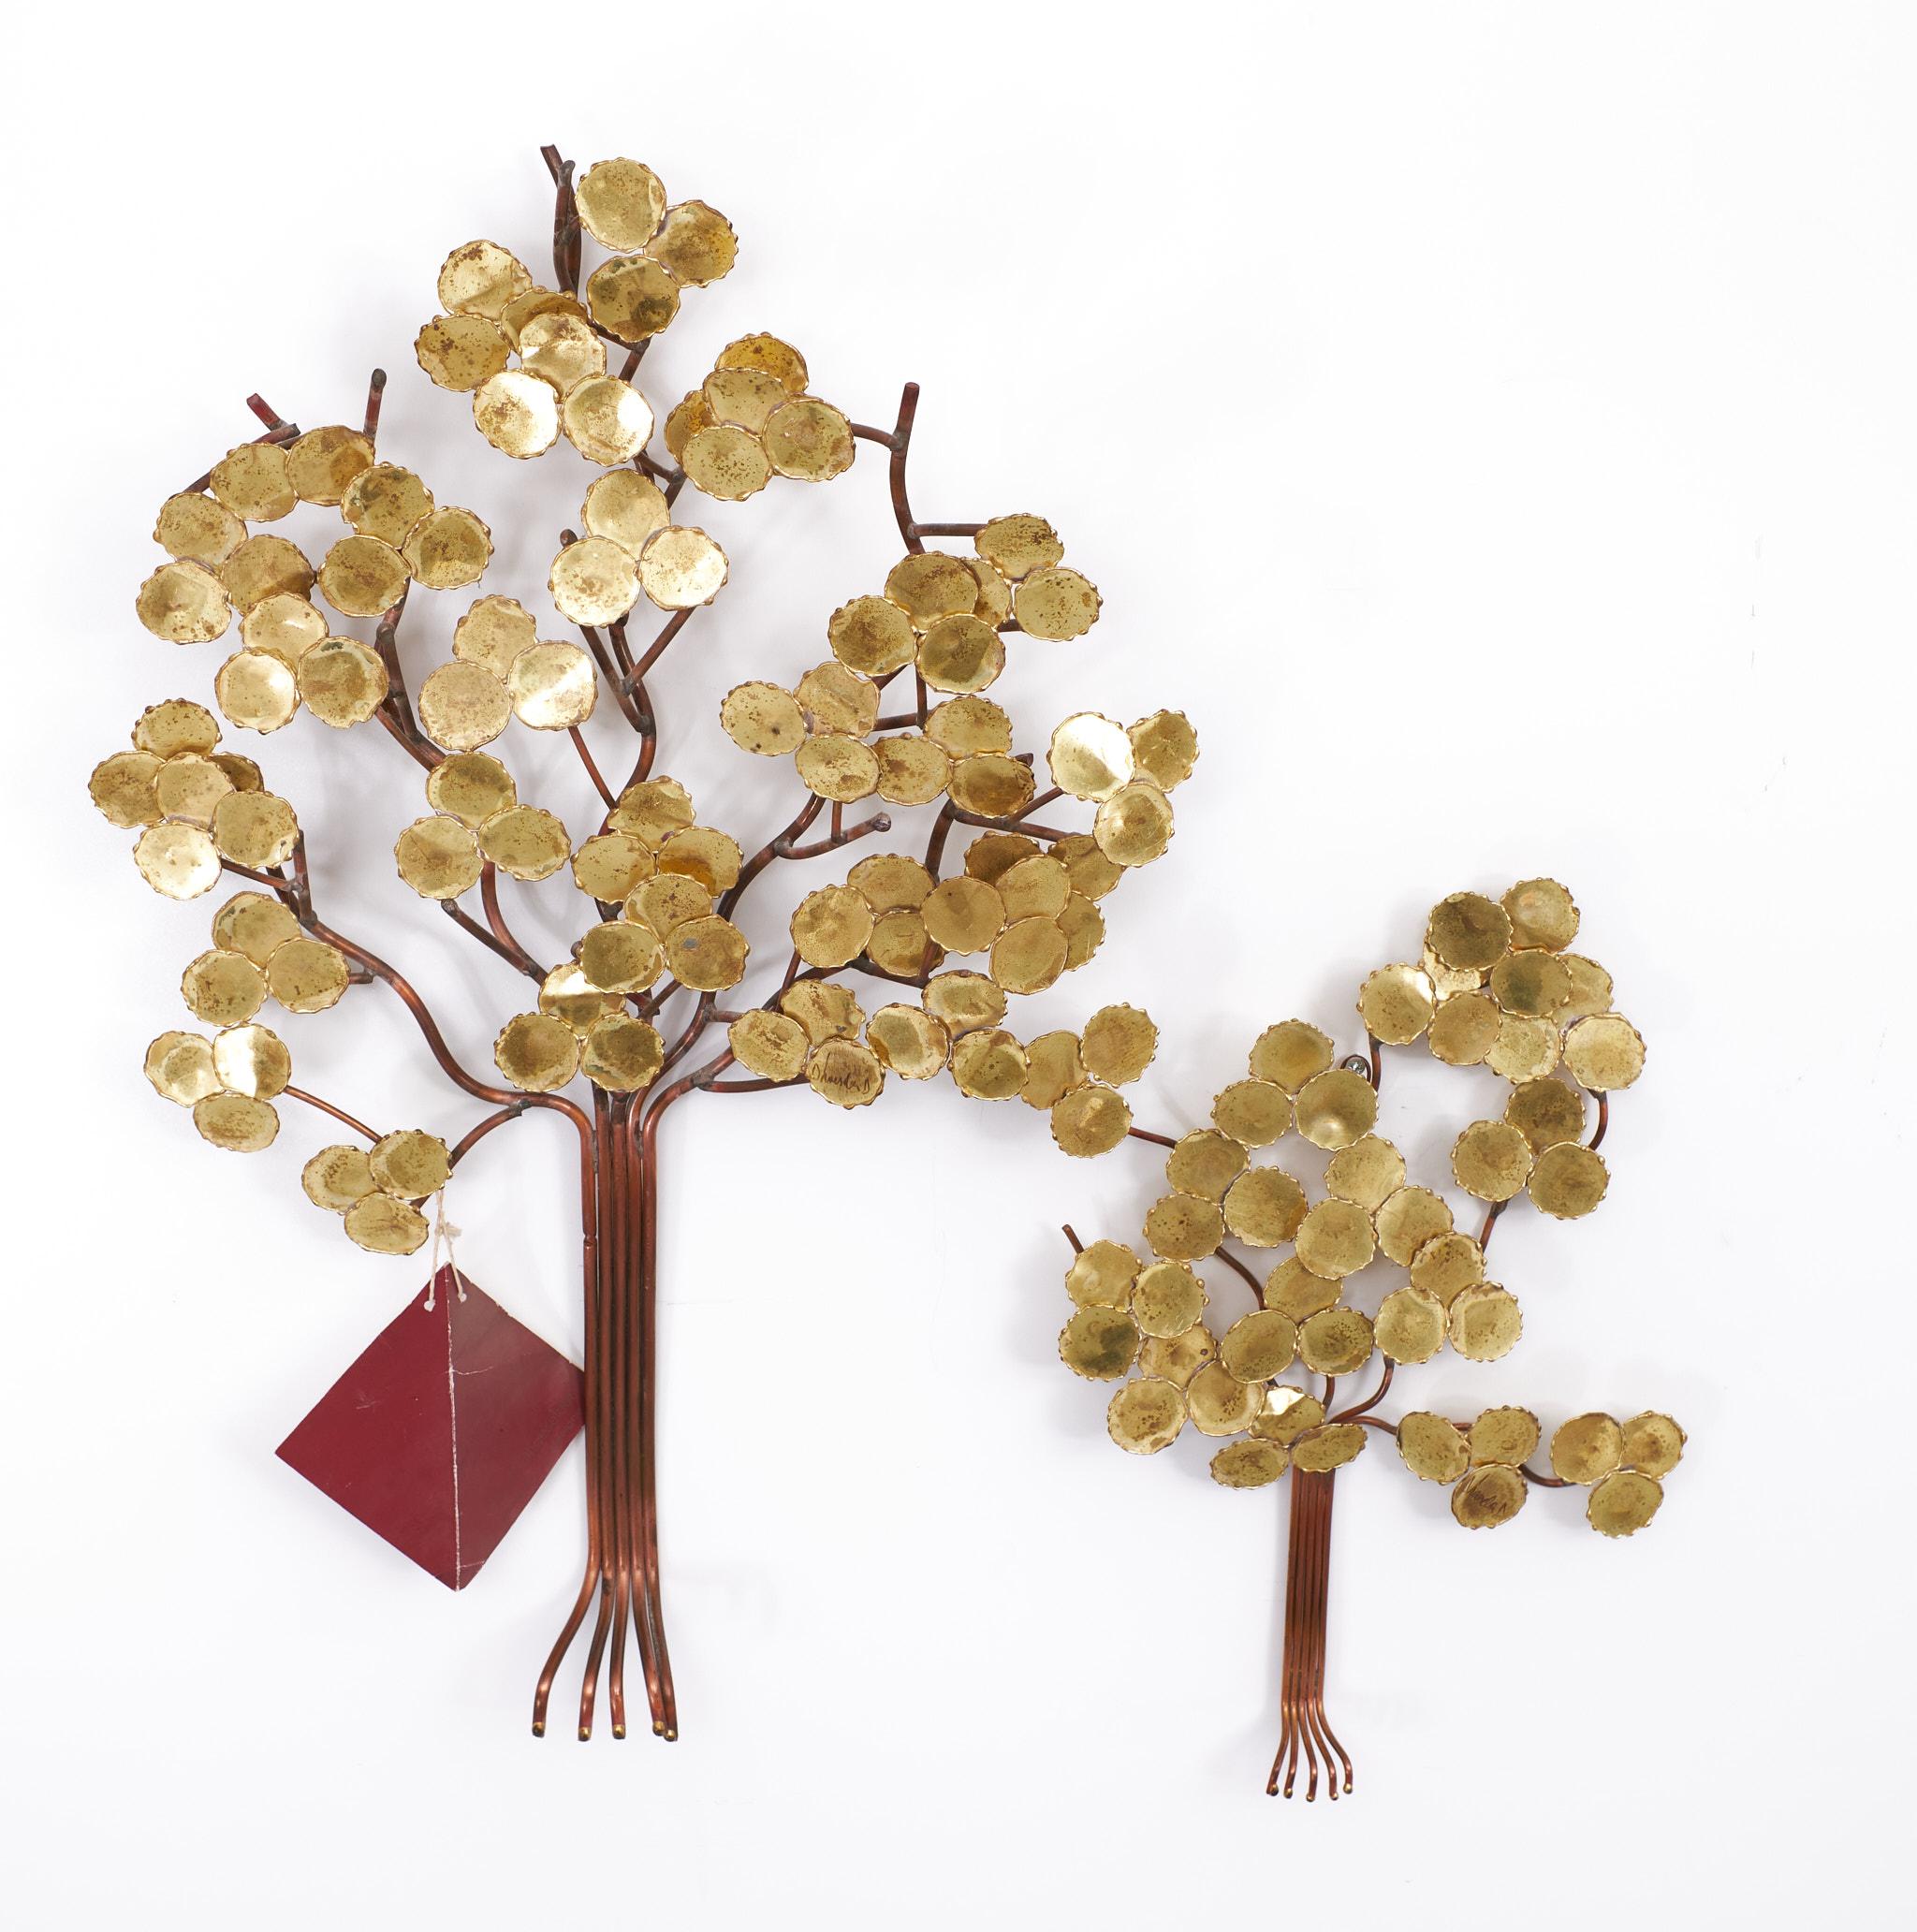 Late 20th Century Daniel Dhaseleer Wall Trees  sculptures Brass Copper 1970s Belgium    For Sale